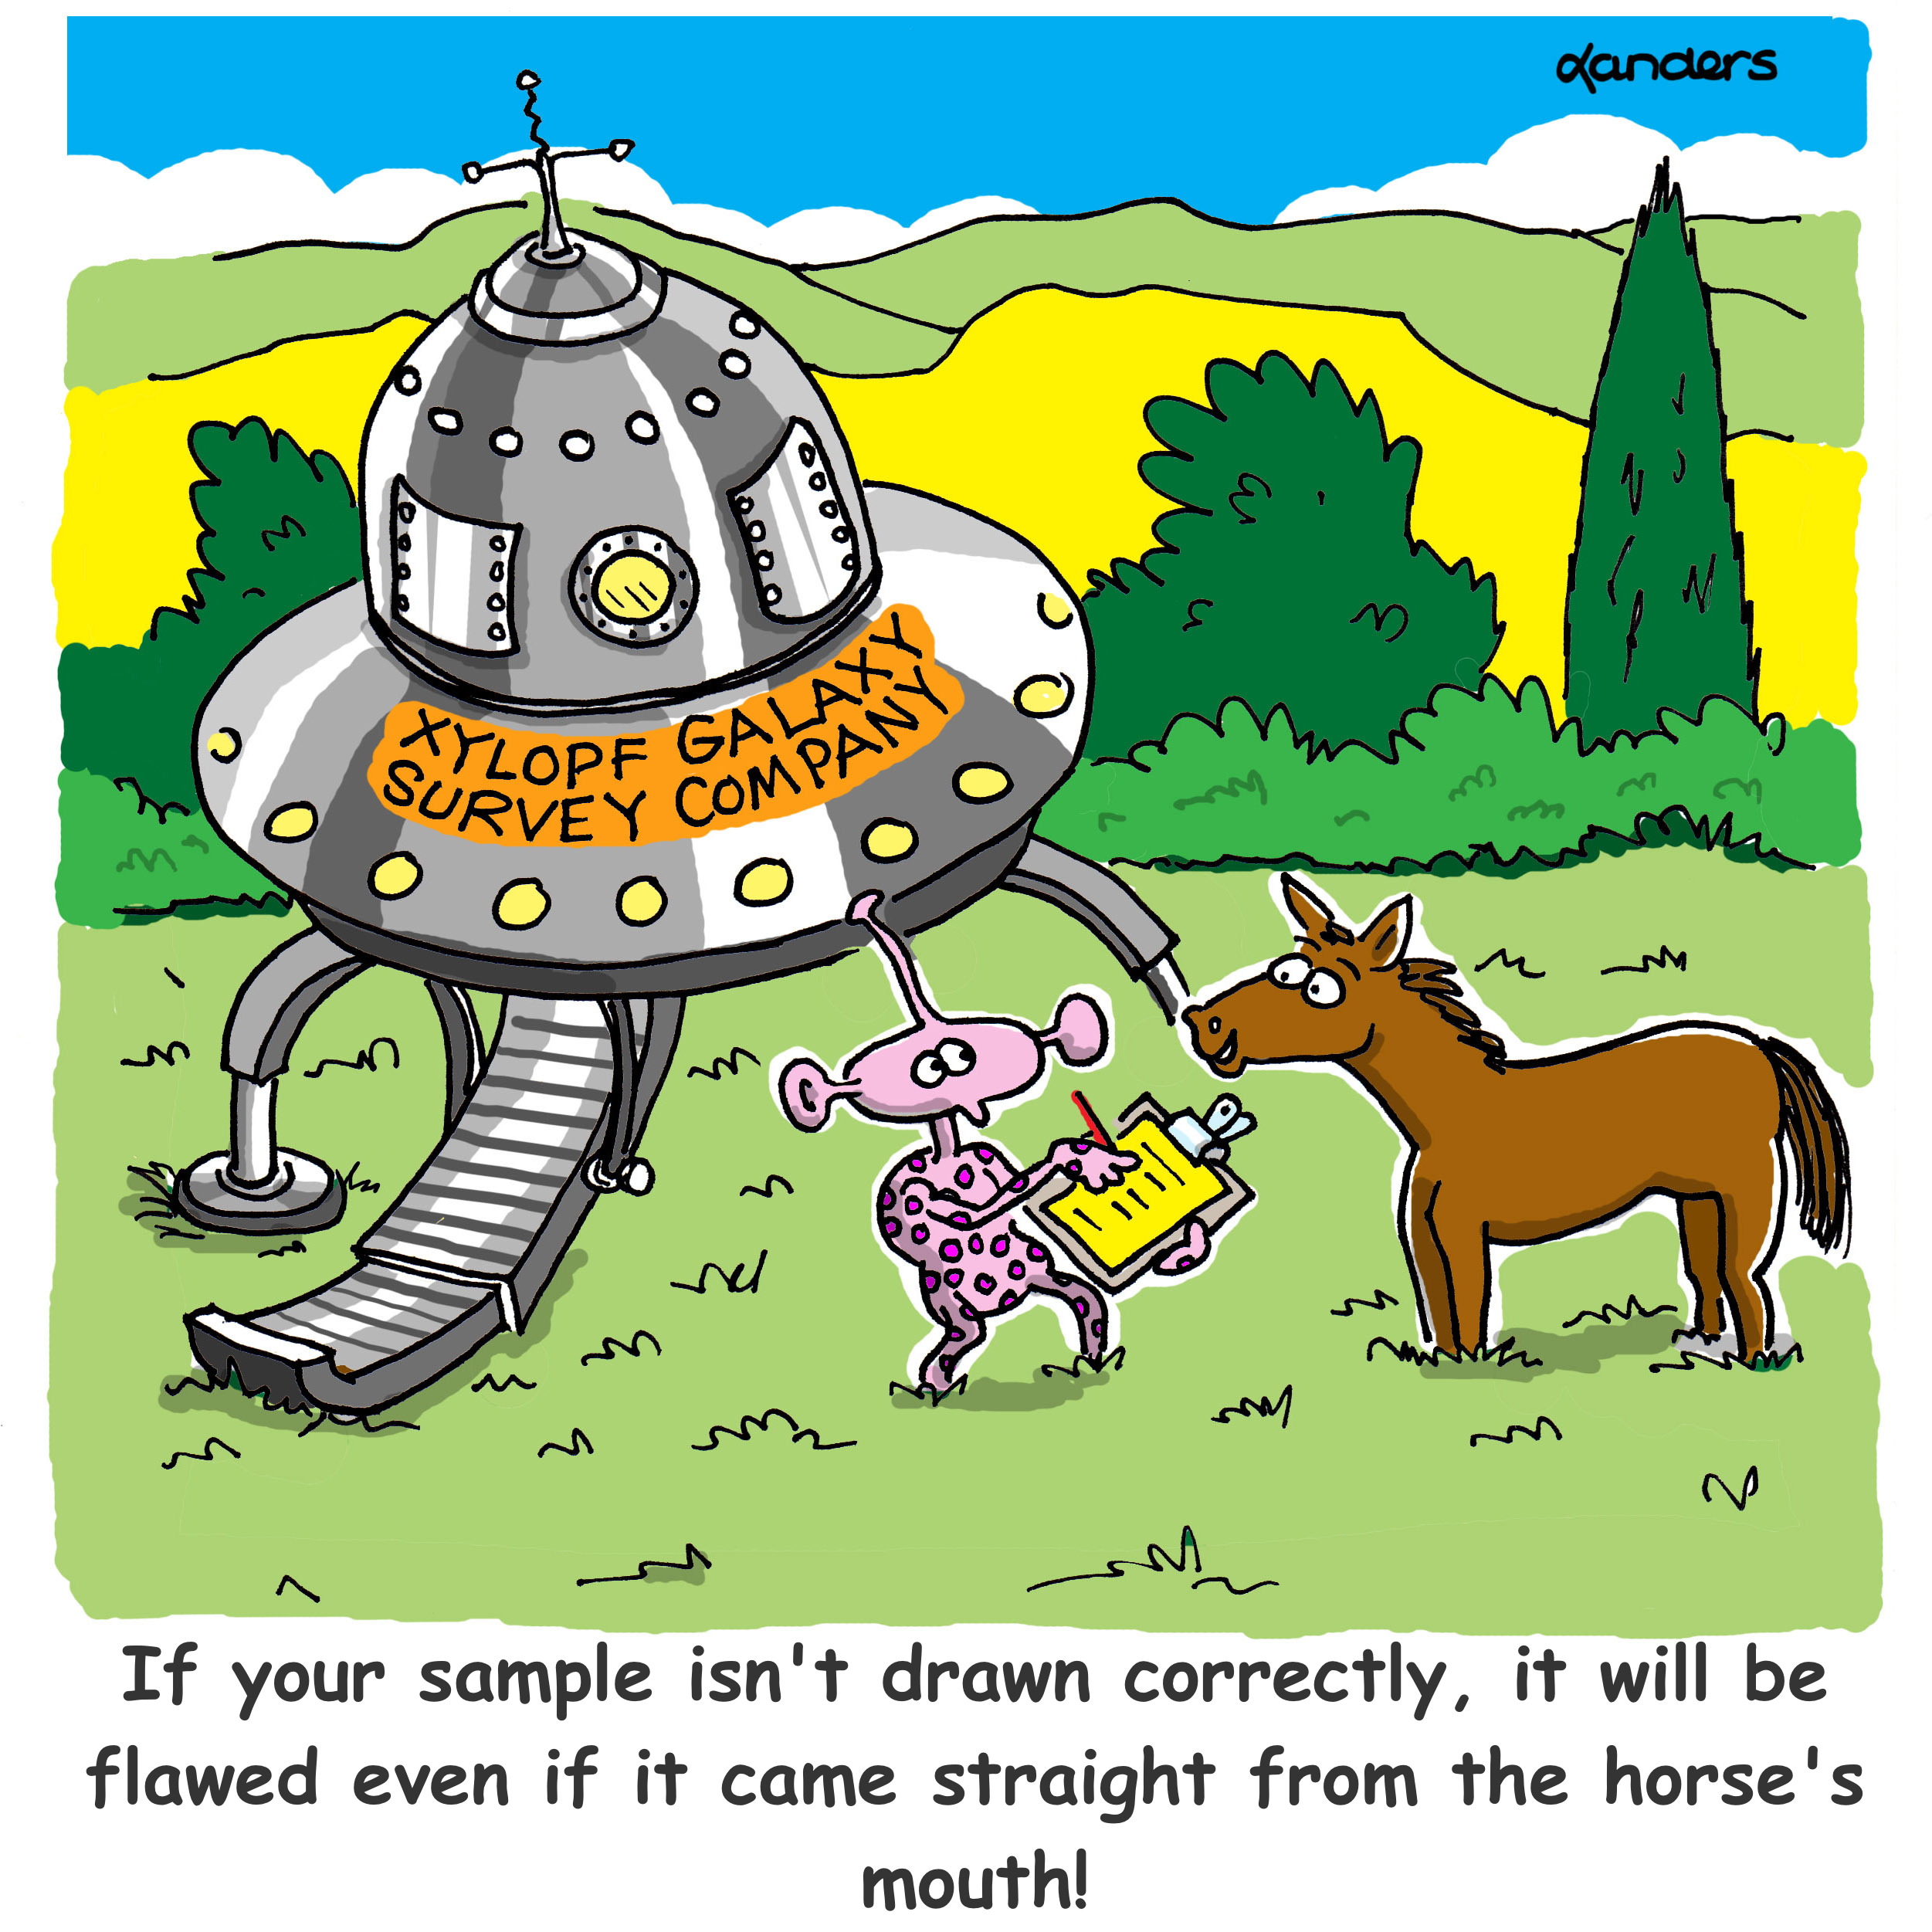 a cartoon showing an alien from the "XYLOPH survey company" interviewing a horse